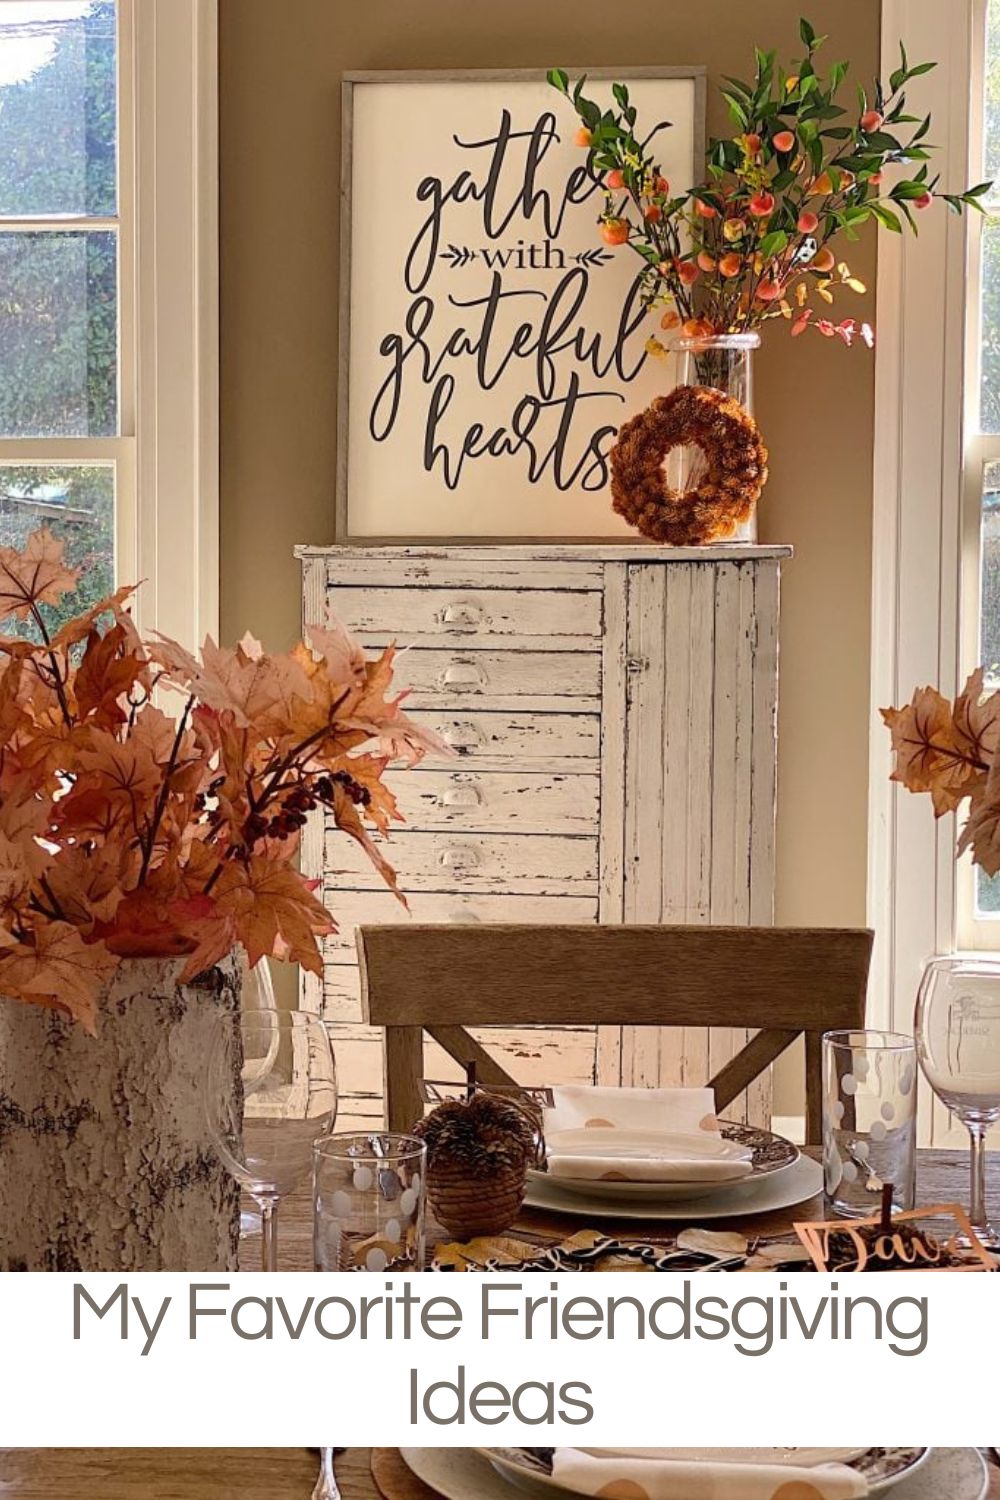 Have you ever thought about hosting a Friendsgiving dinner? Today I am sharing some fun Friendsgiving ideas and DIY's so you can host one too.